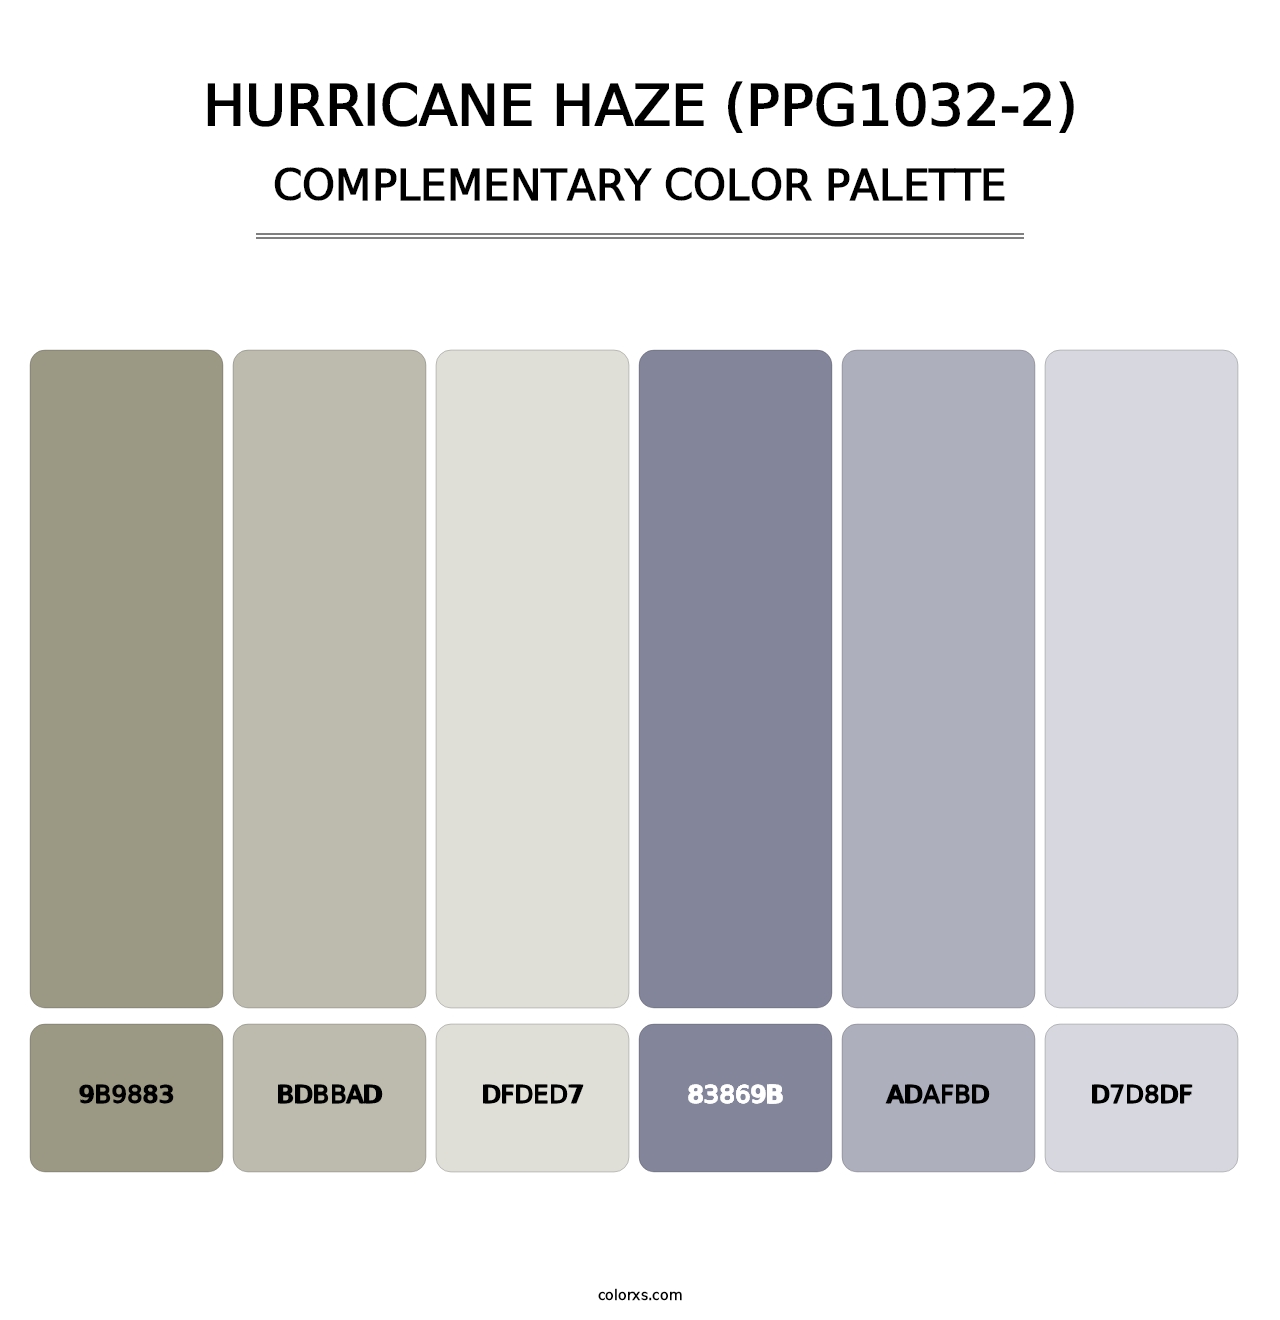 Hurricane Haze (PPG1032-2) - Complementary Color Palette